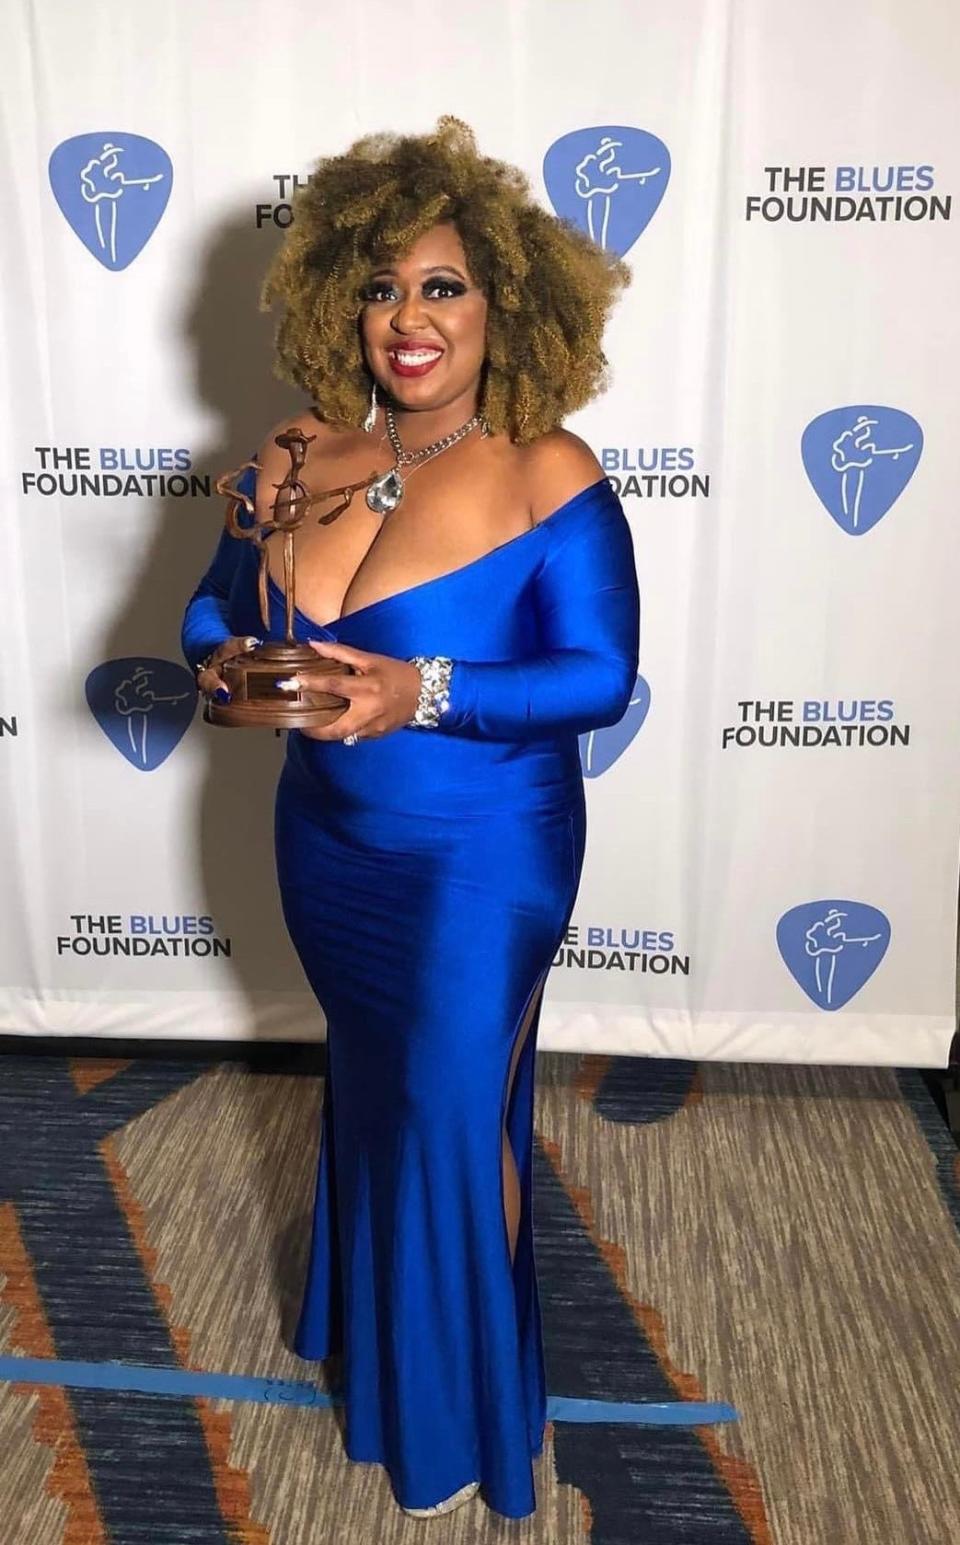 Annika Chambers recently was recognized with an award from The Blues Foundation at an event in Memphis. Chambers is headlining Saturday's Canton Blues Fest in downtown Canton.